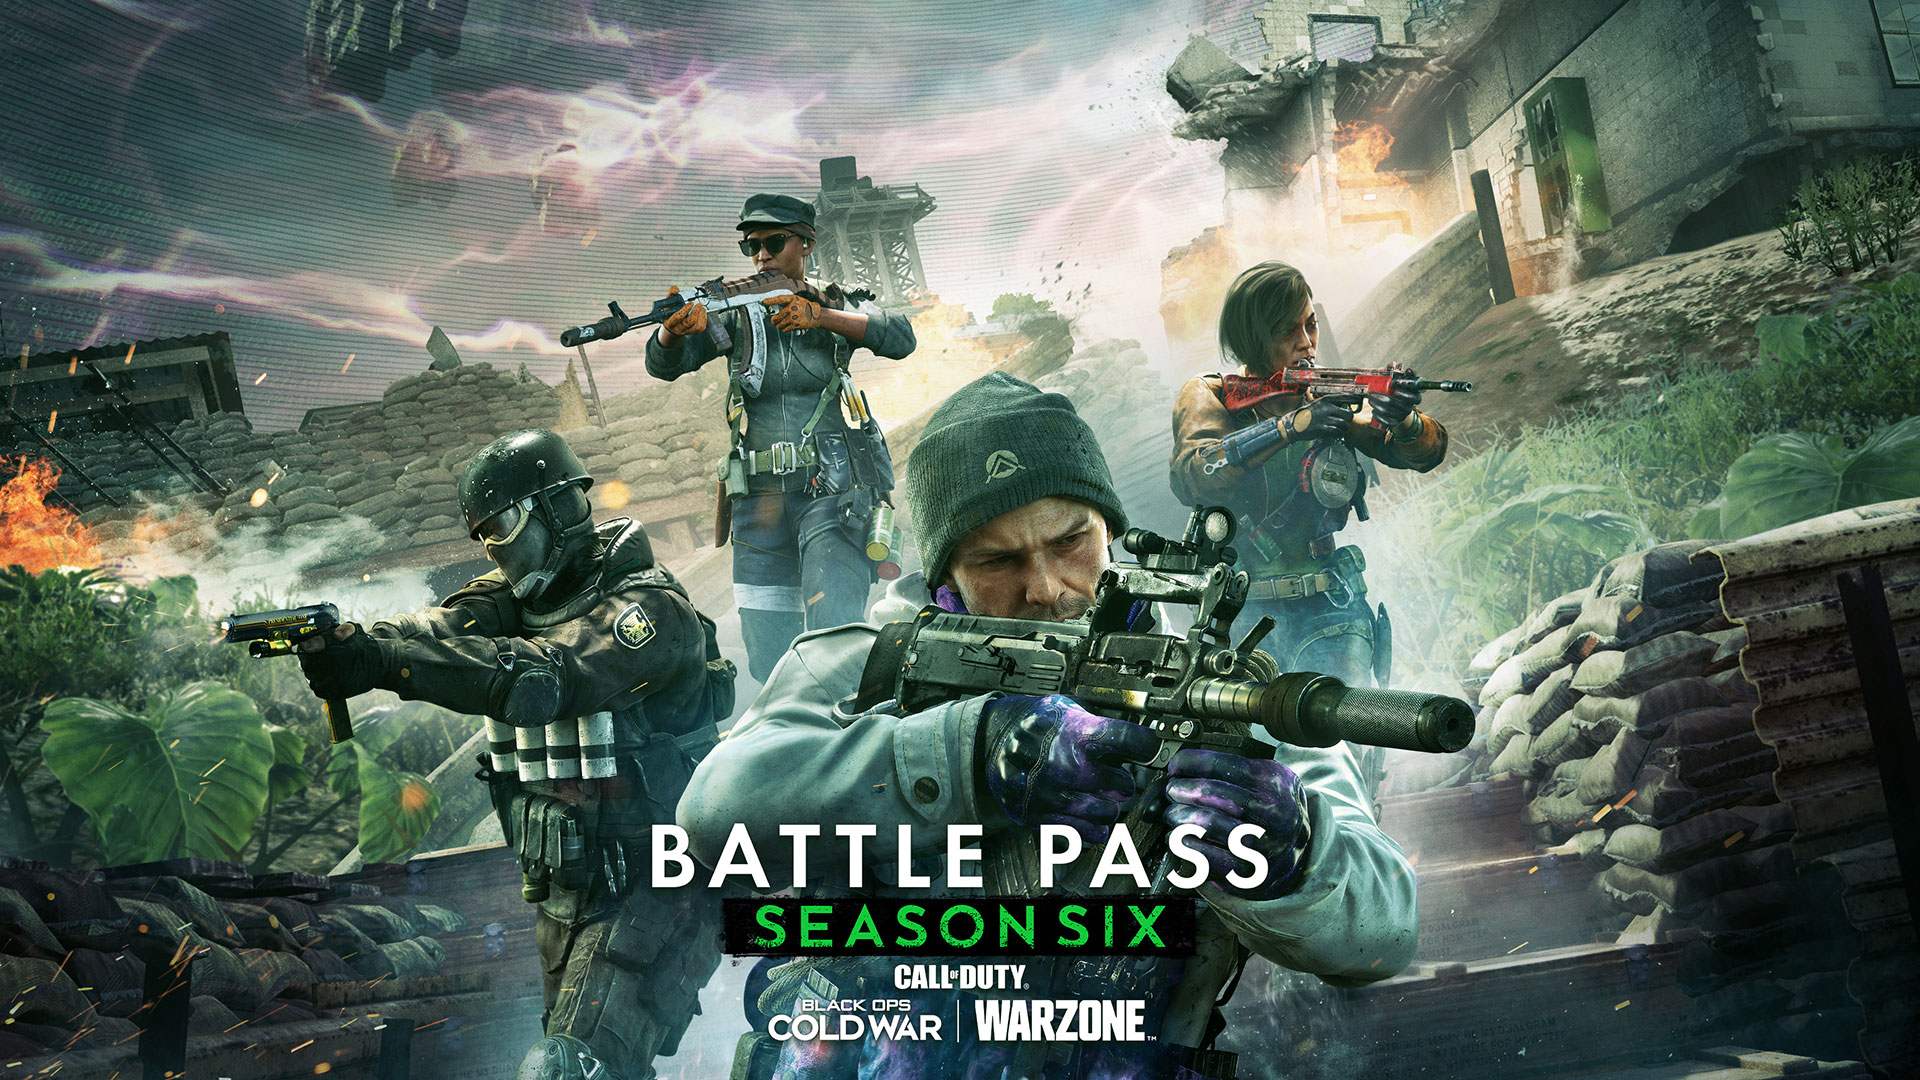 Season Six Battle Pass and bundle breakdown for Black Ops Cold War and Warzone